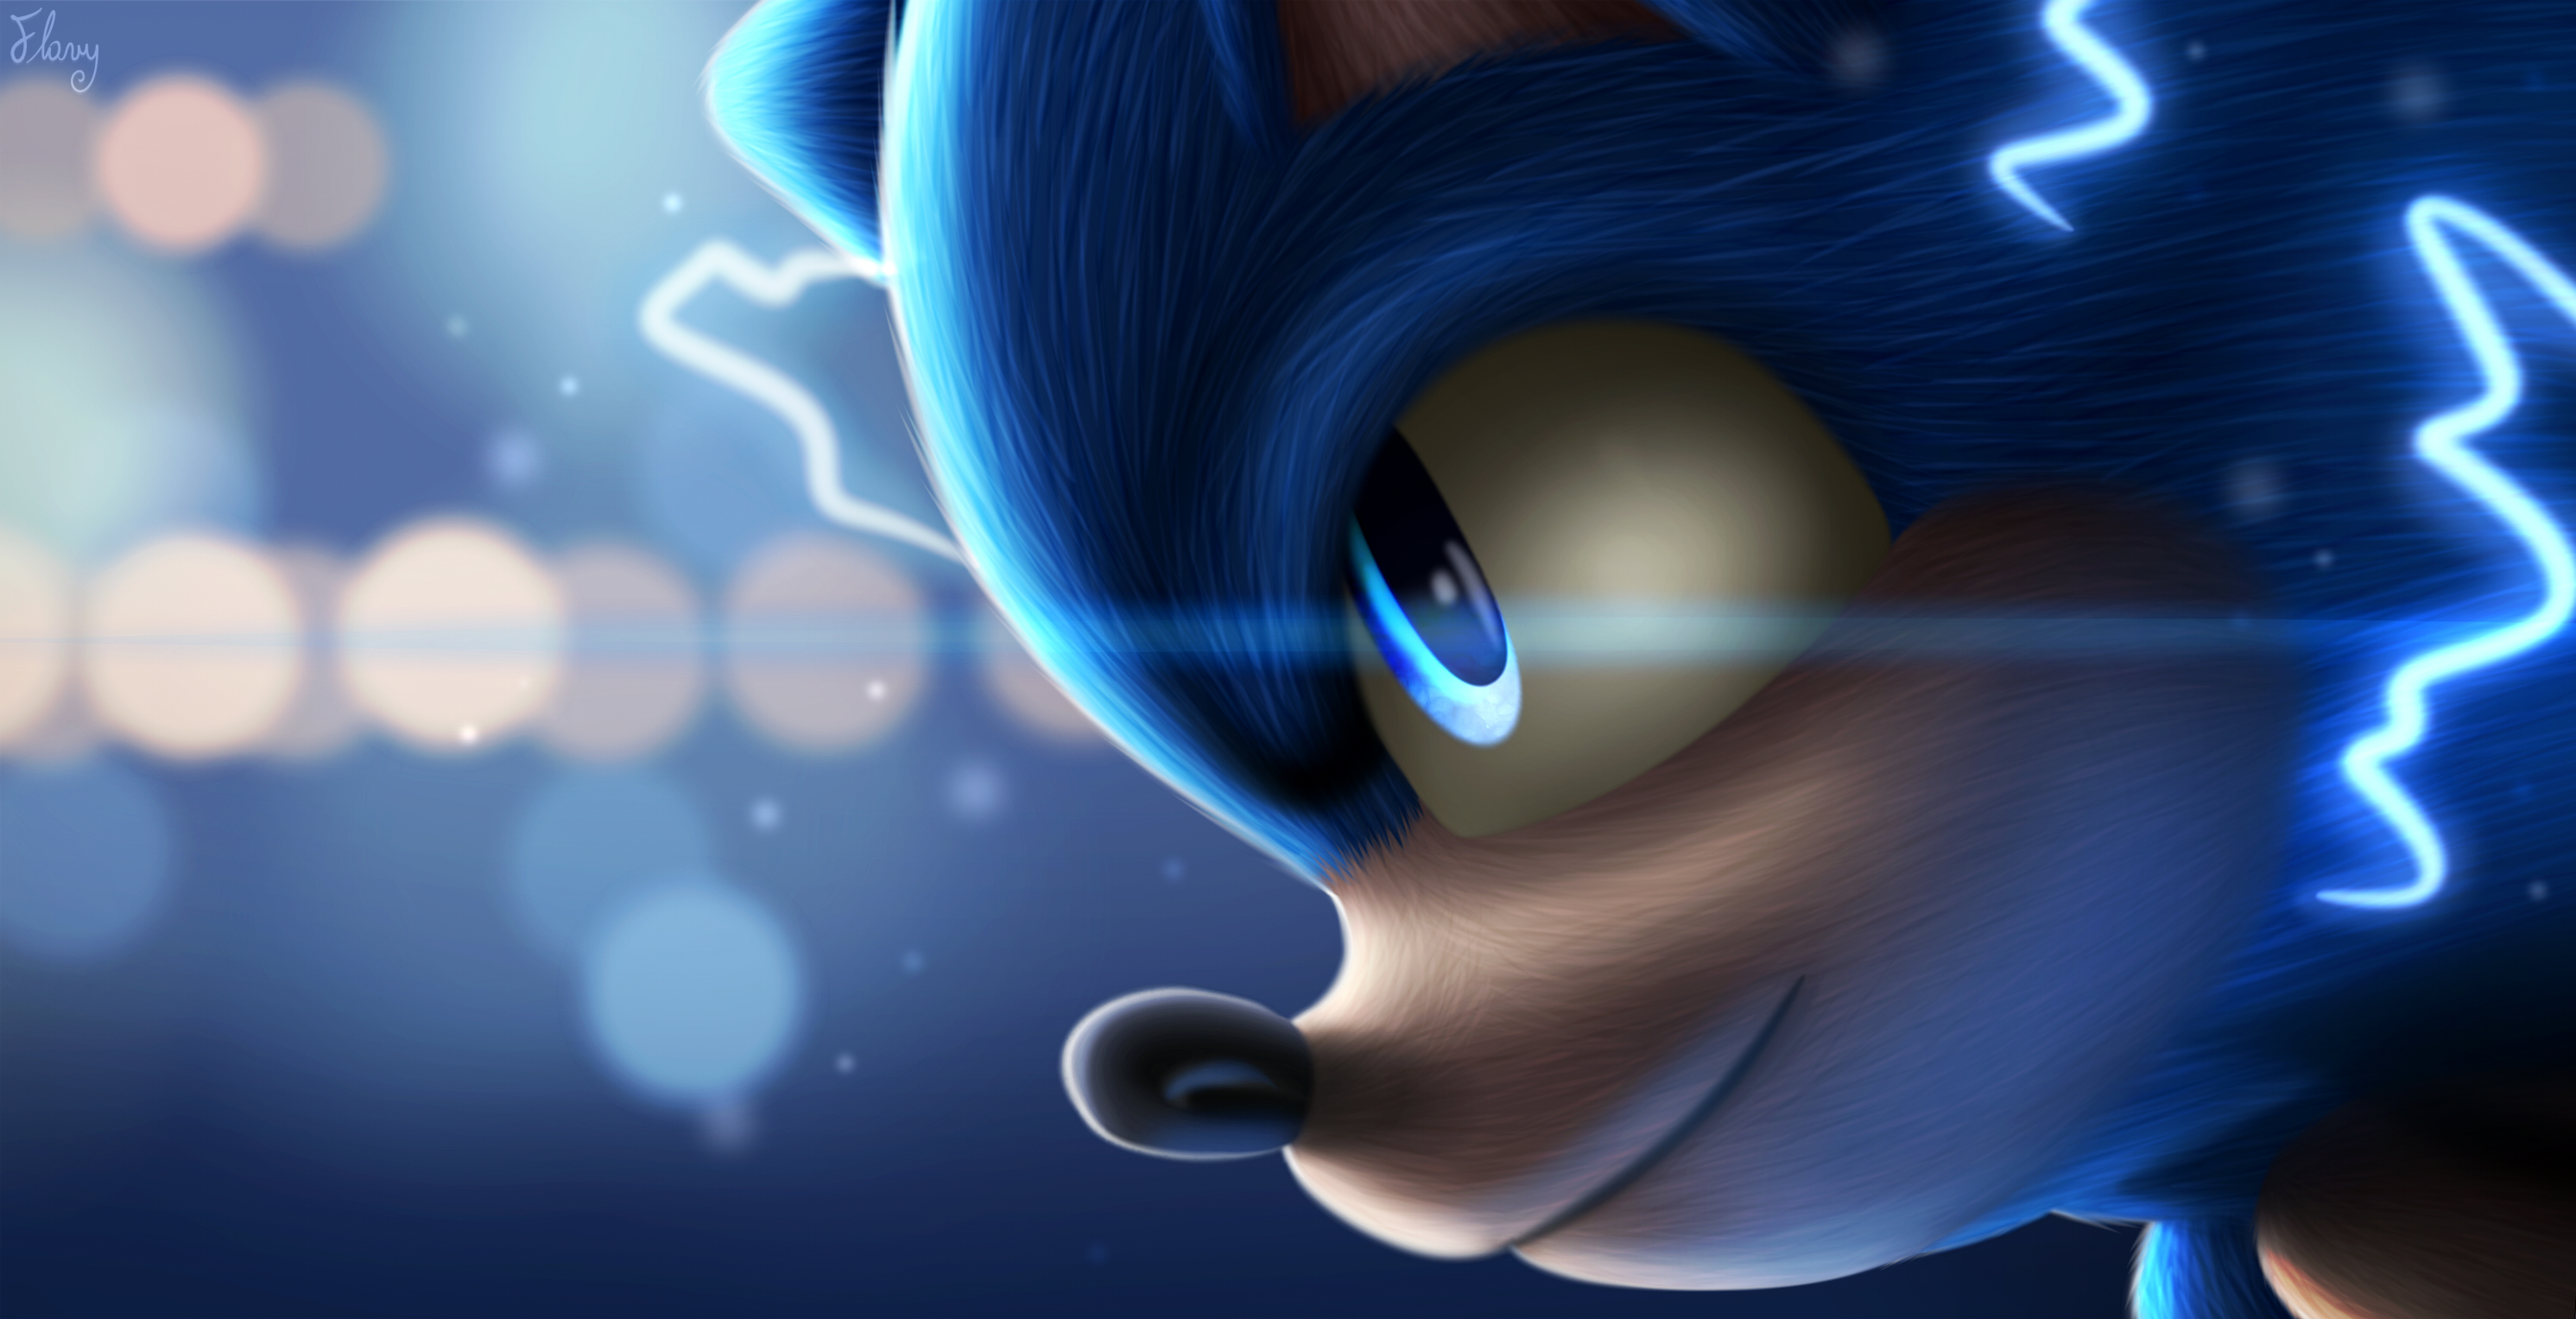 Sonic The Hedgehog Art Wallpaper Hd Movies 4k Wallpapers Images Photos And Background